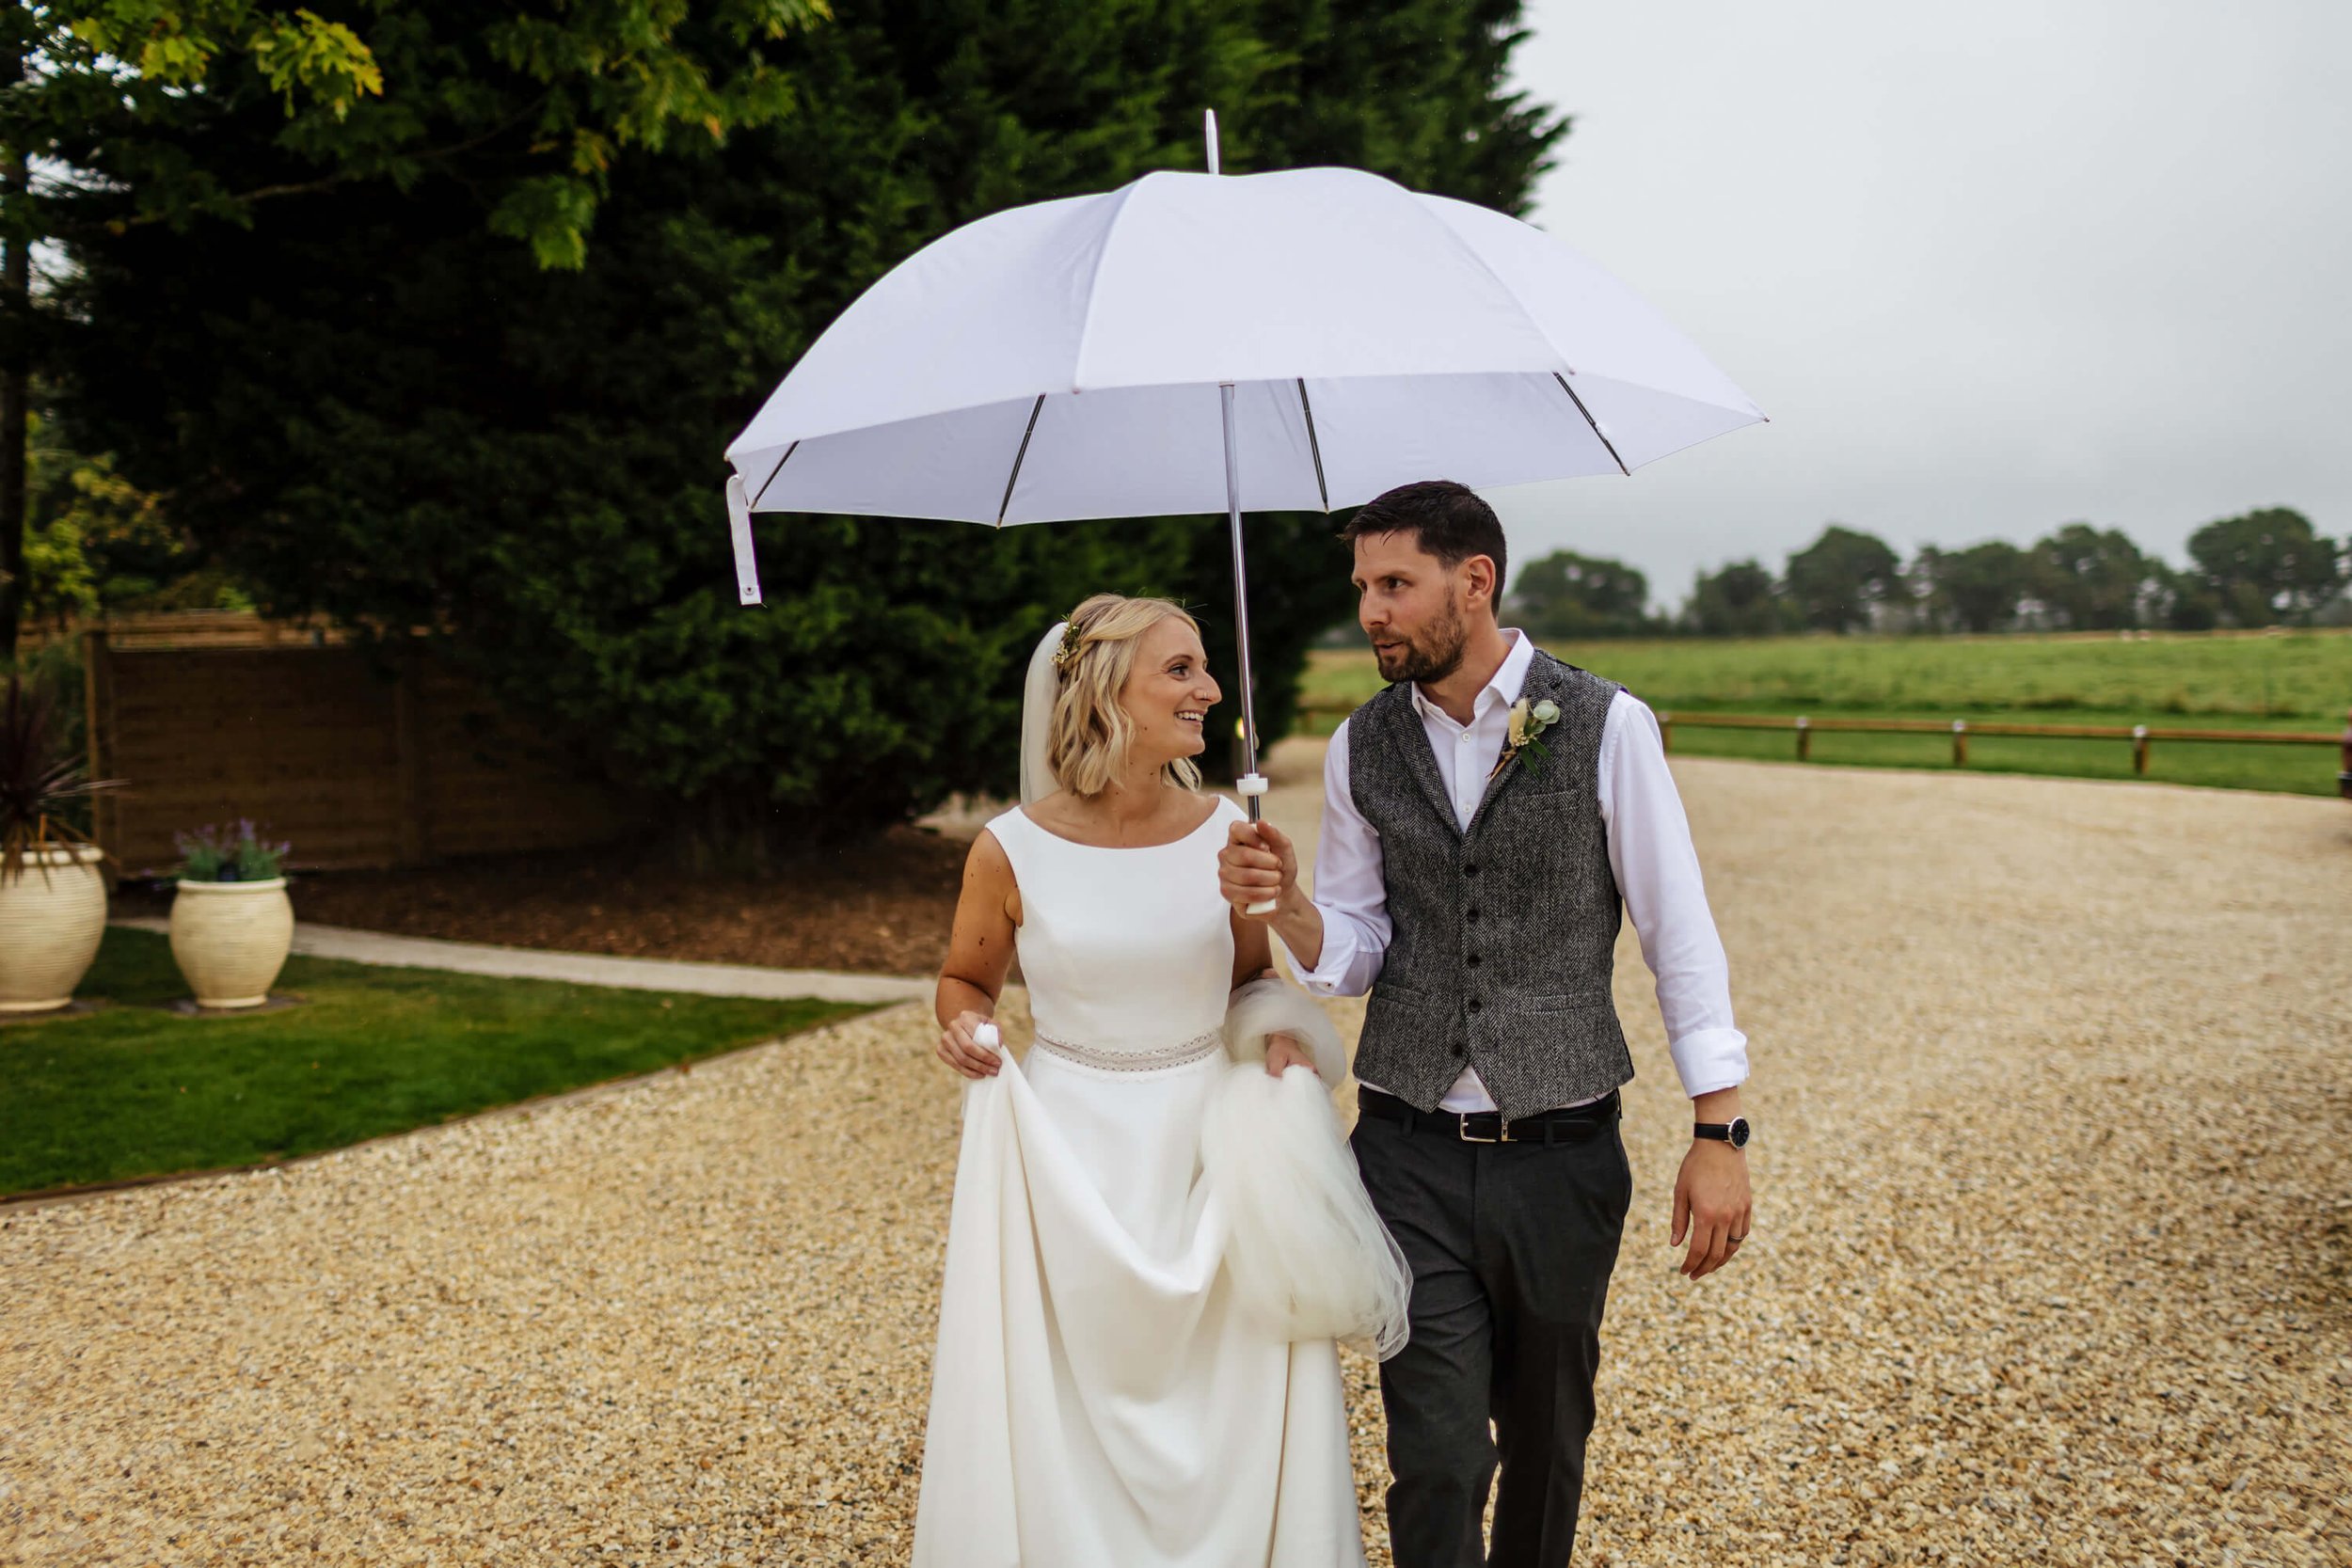 Bride and groom under an umbrella at their wedding